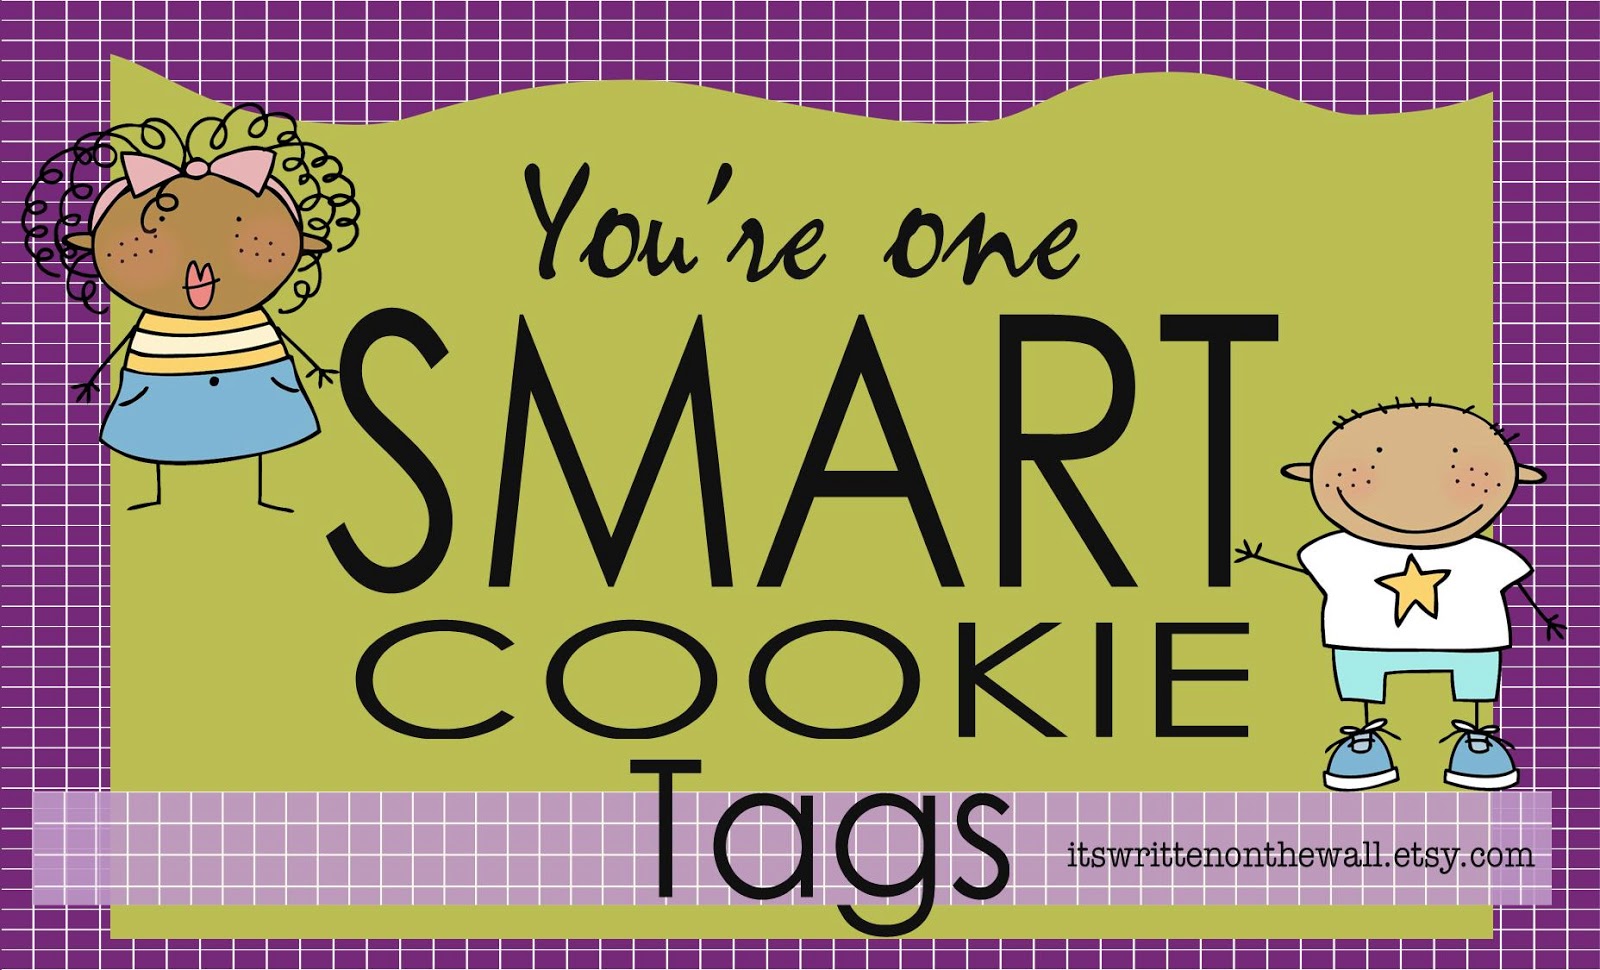 18 Fun TagsYou're One Smart CookieFor Kids Lunches (Home & School